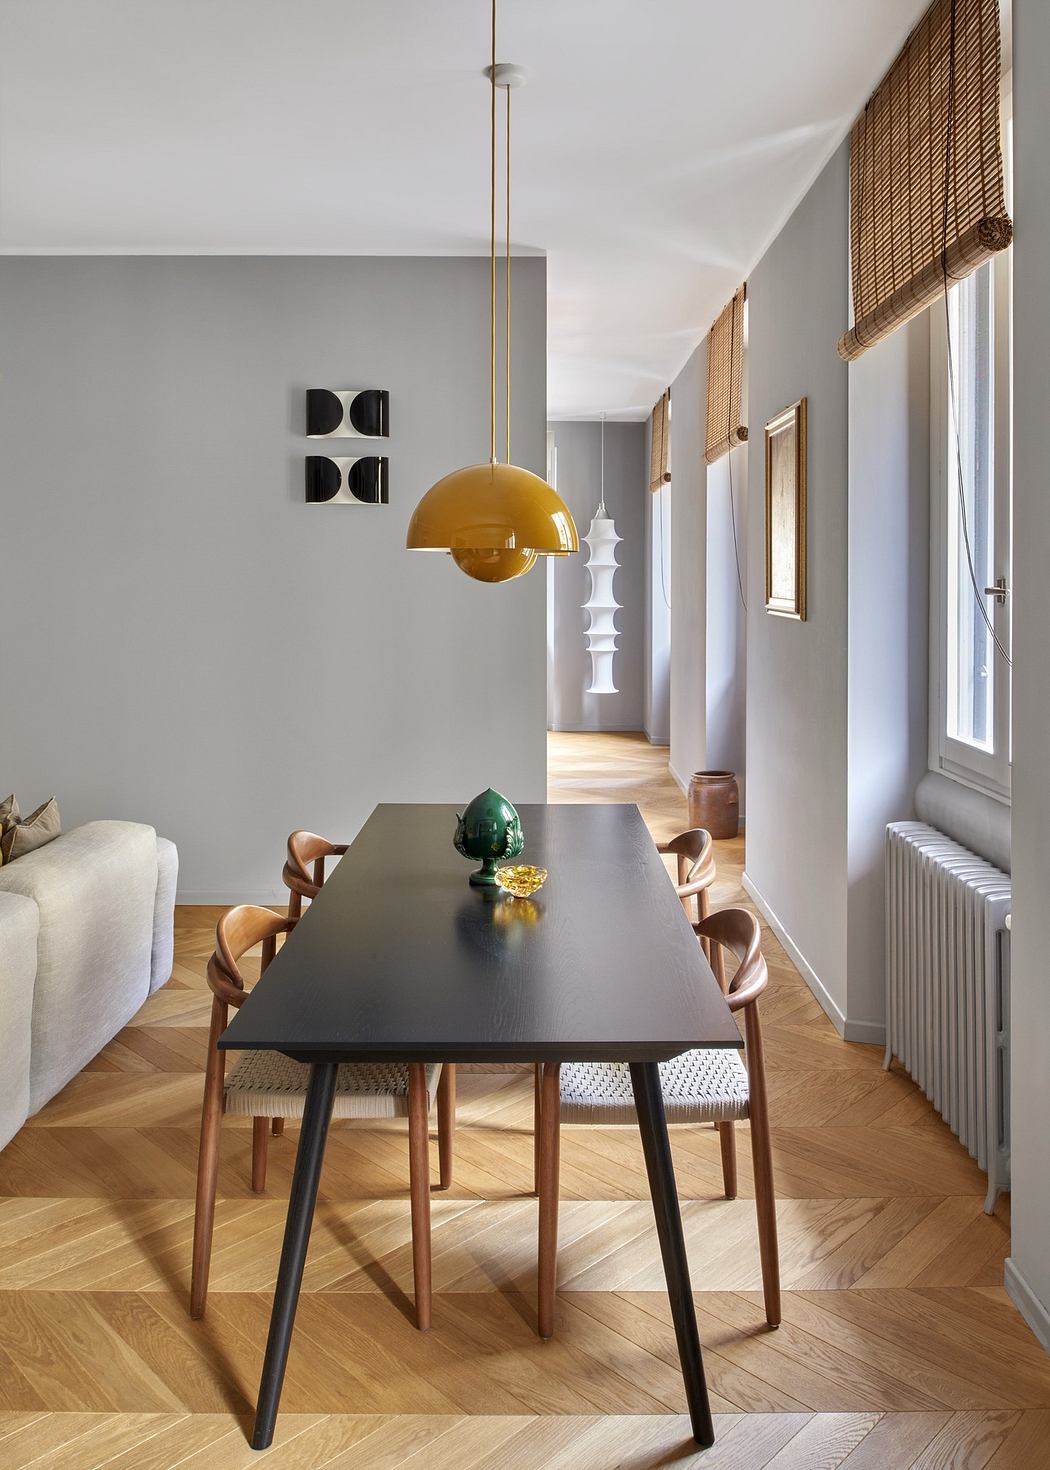 Contemporary dining room with a yellow pendant lamp and wooden floors.